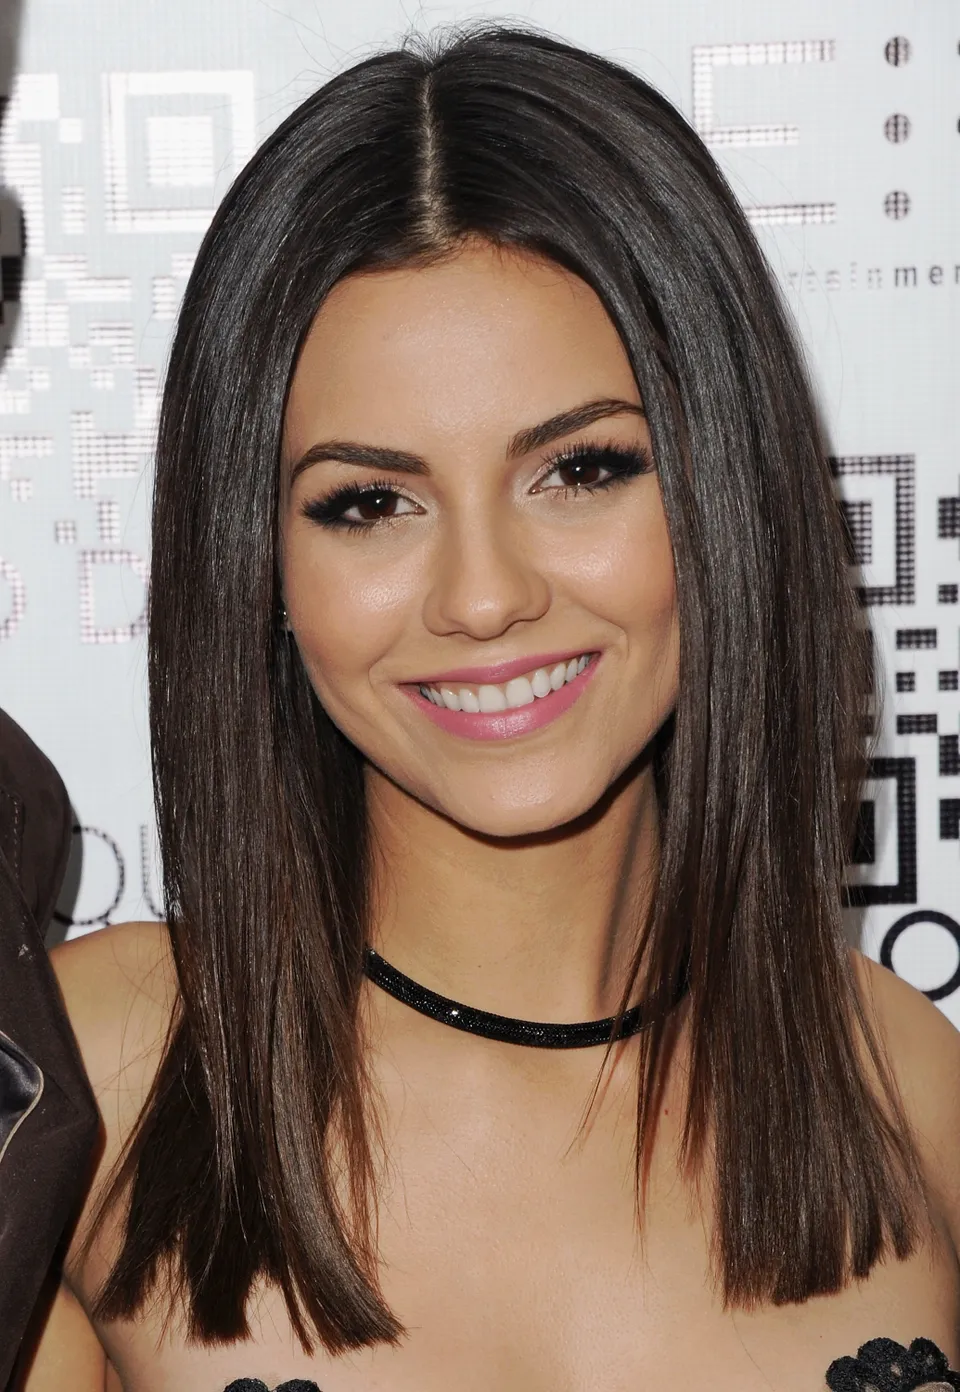 Gettyimages 106041483 Master 12 -Victoria Justice'S Beauty Evolution: From Tween Queen To Timeless Elegance